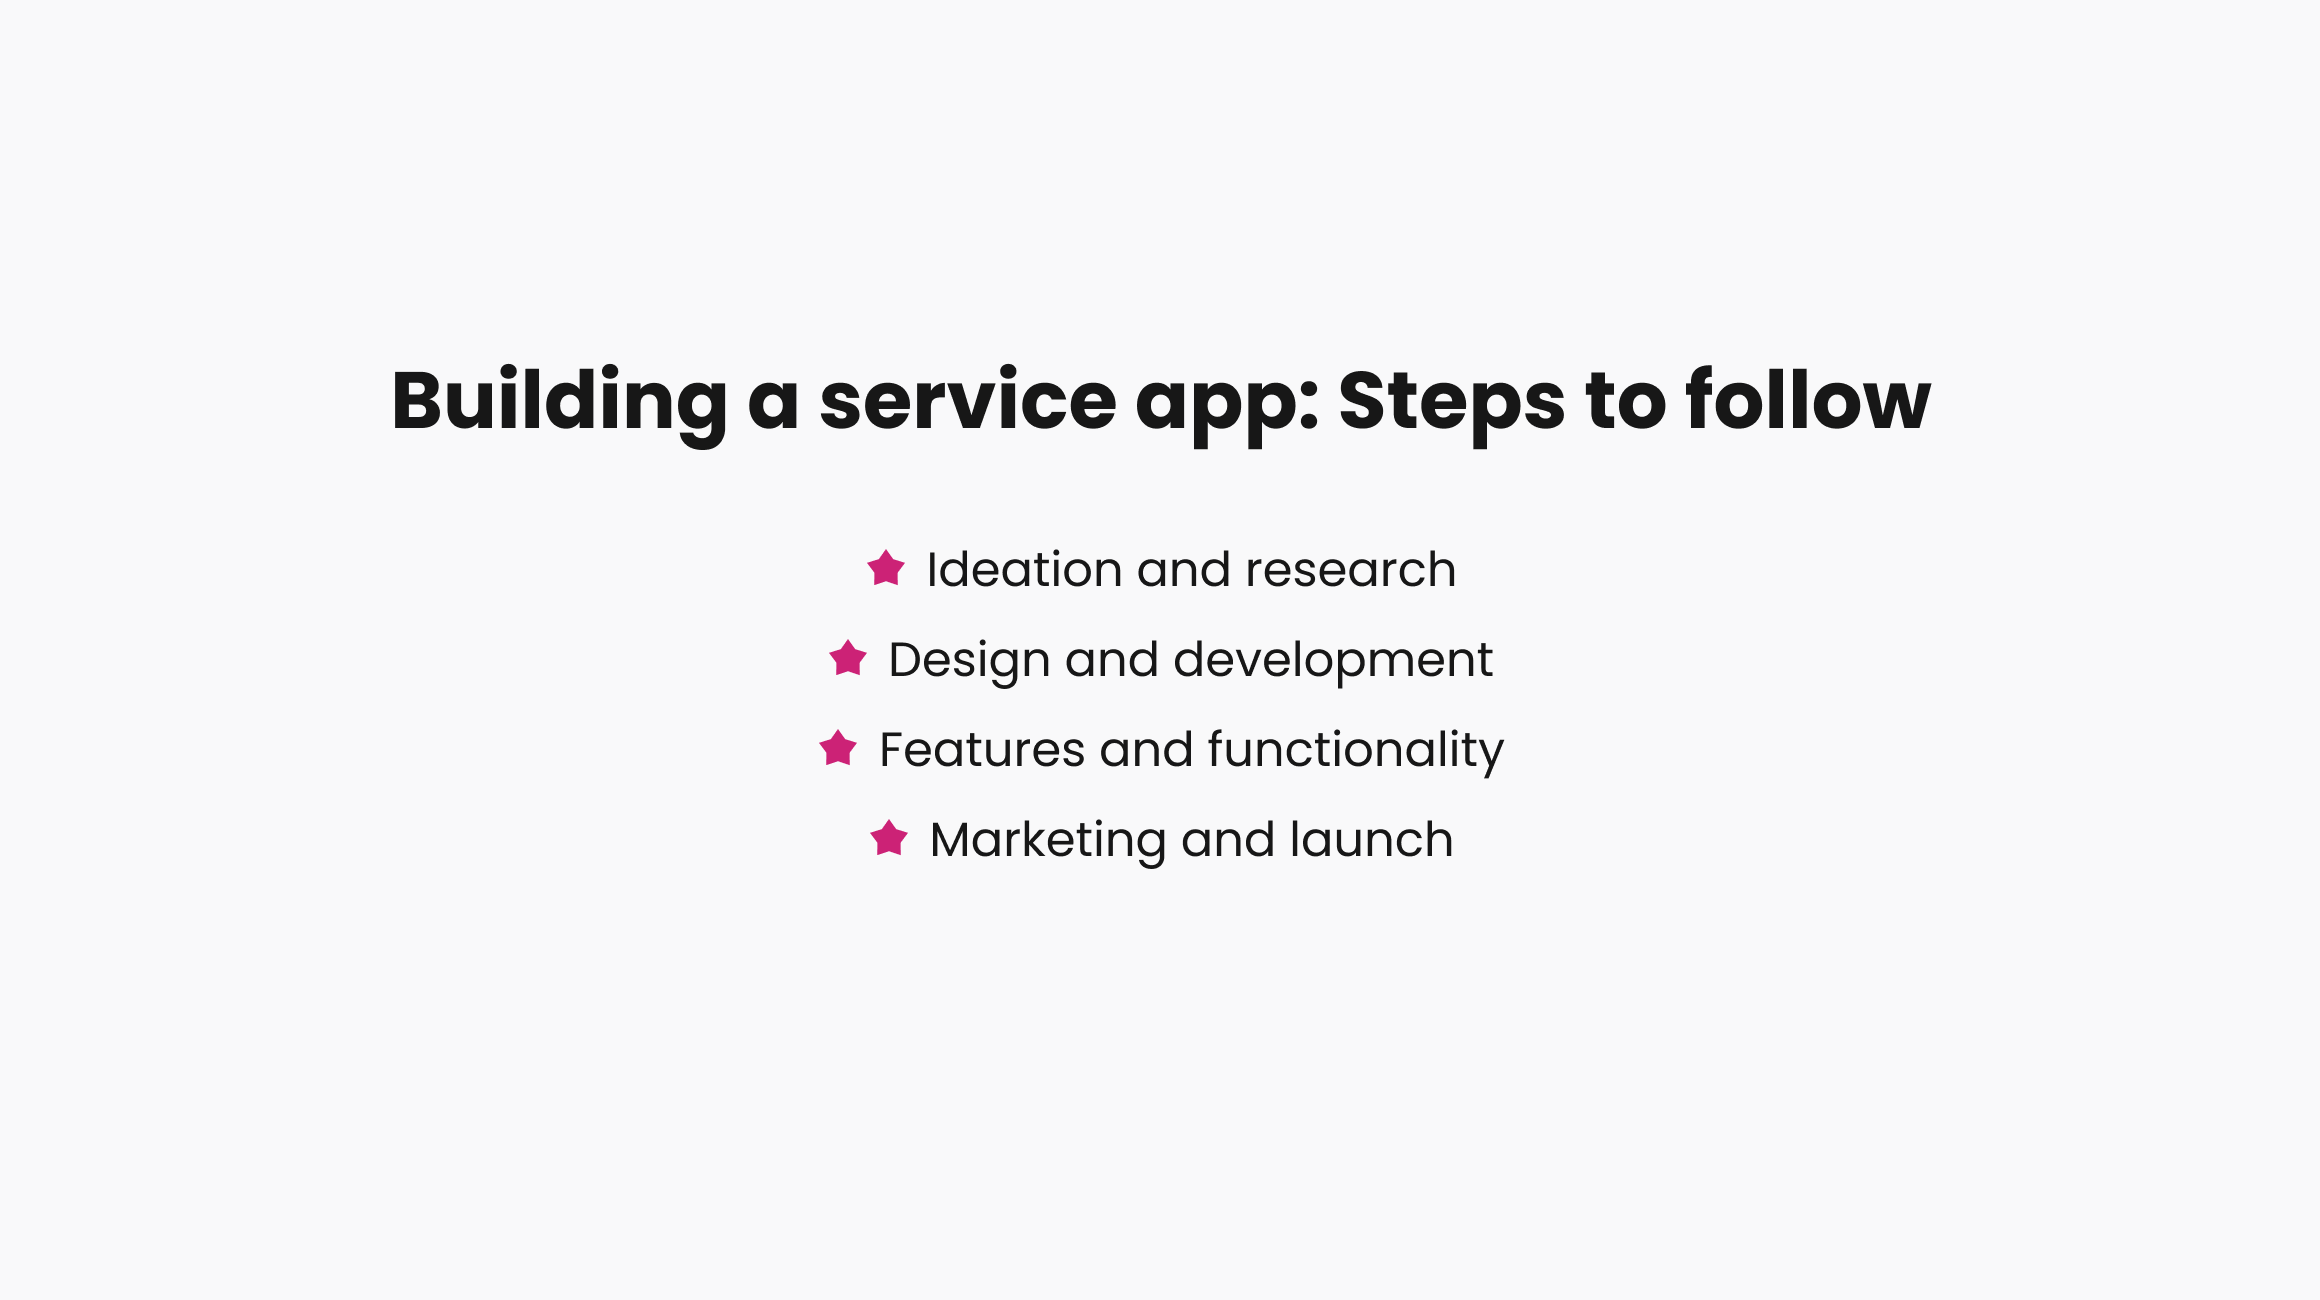 How to build a service app